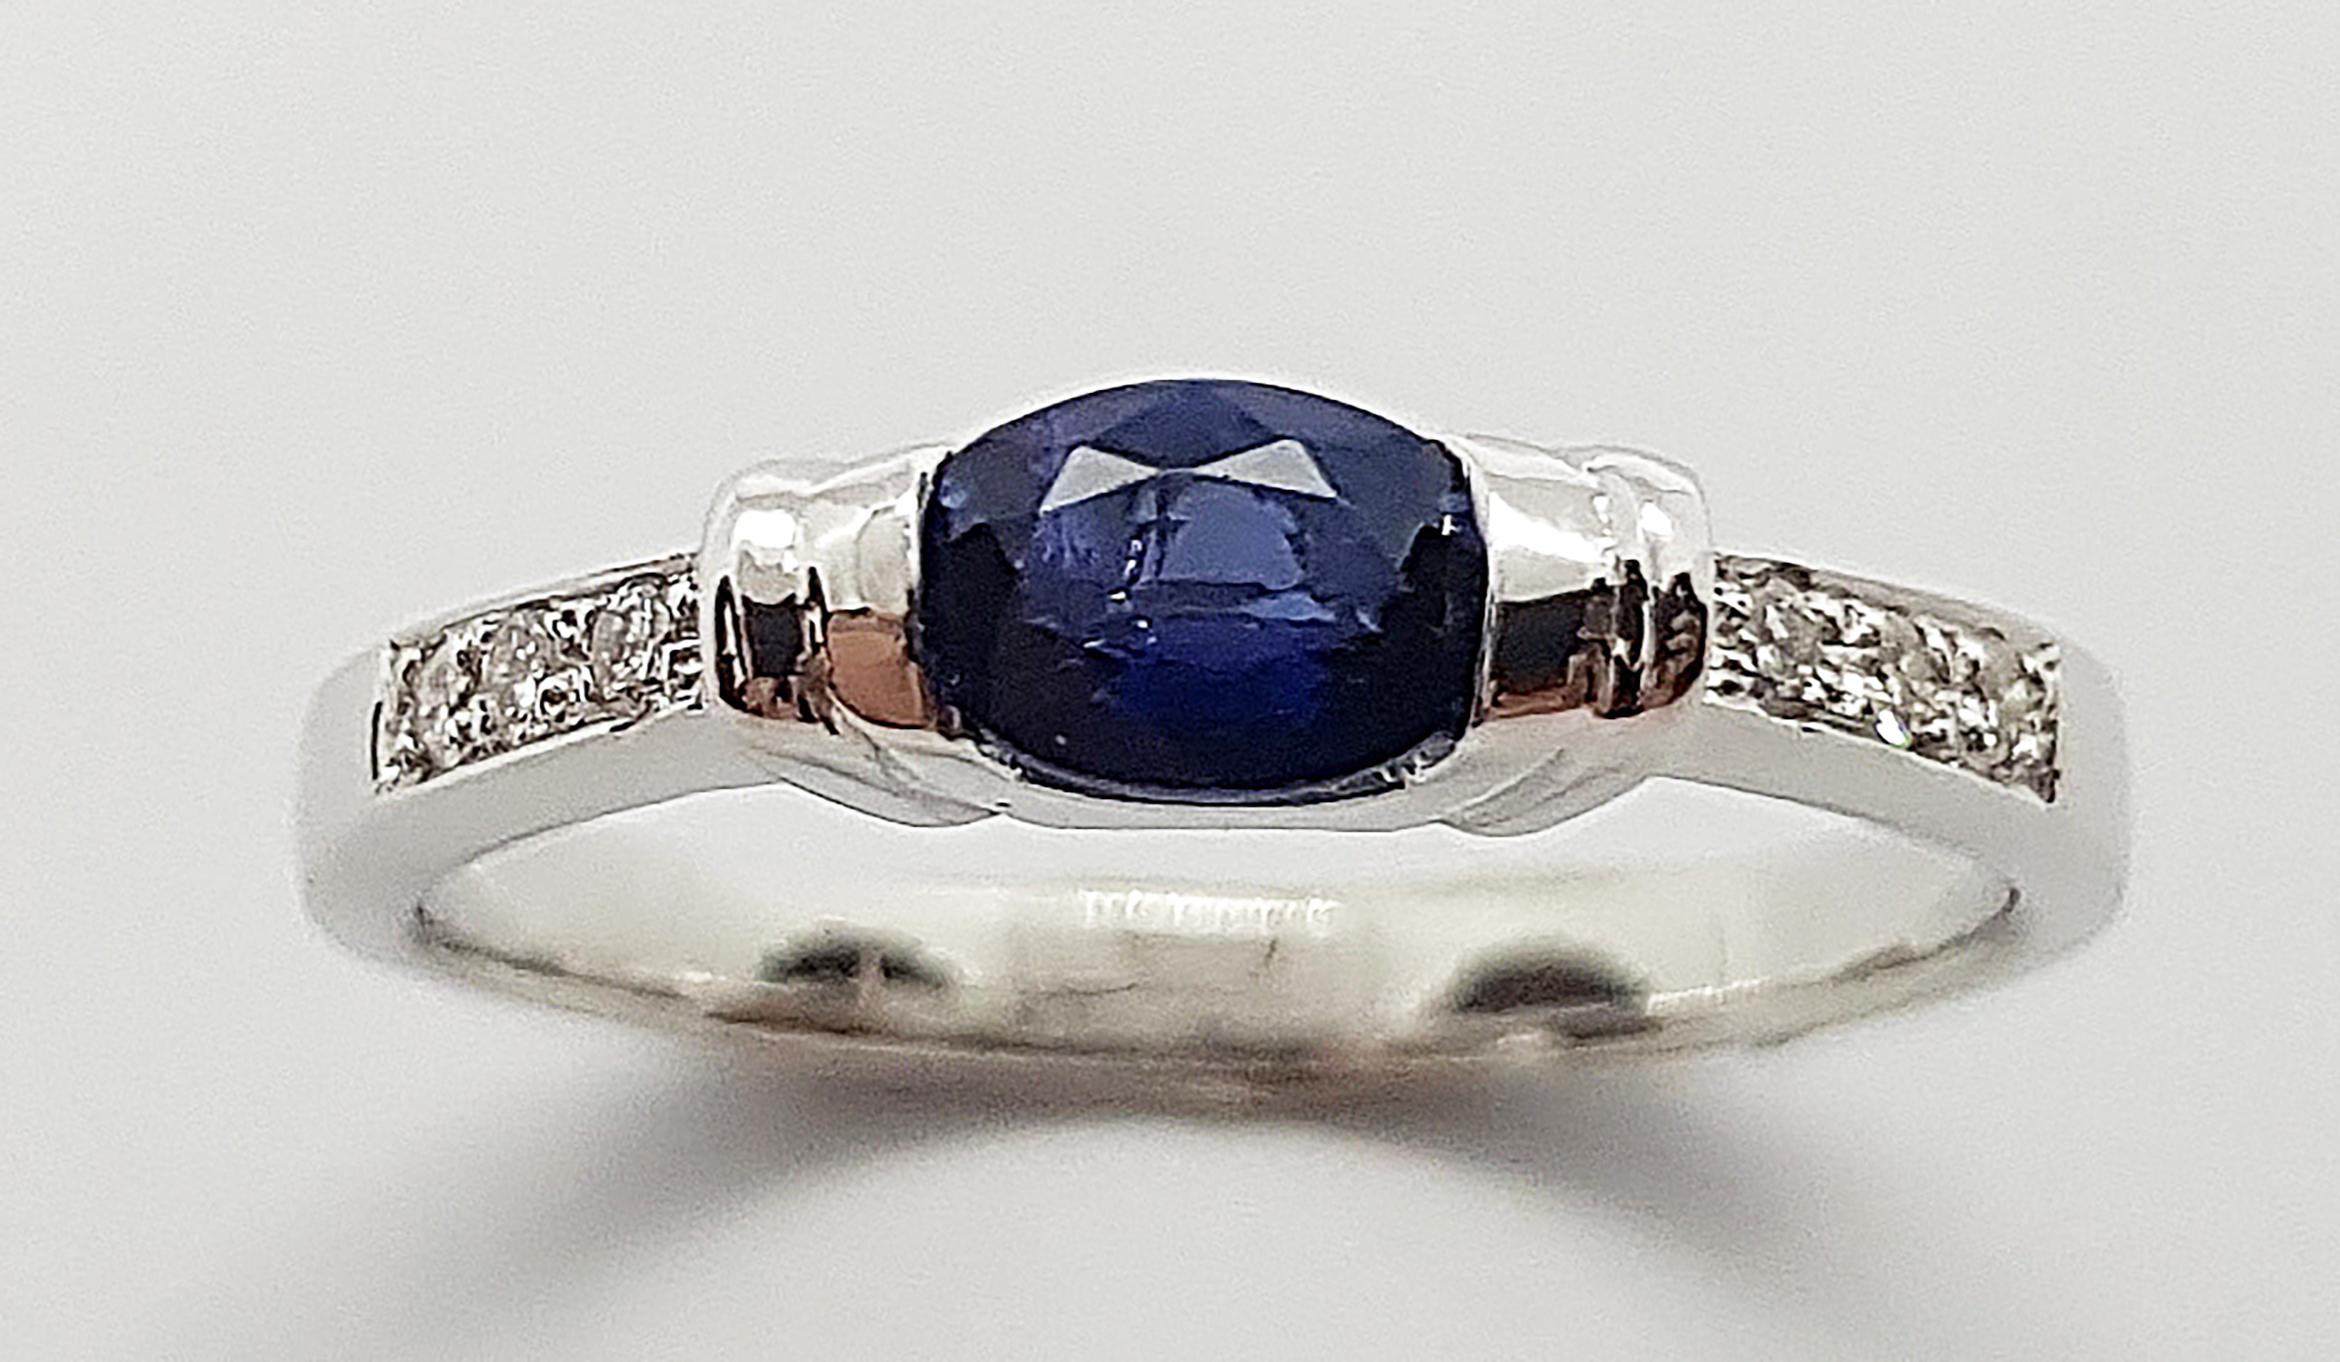 Blue Sapphire 0.52 carat with Diamond 0.07 carat Ring set in 18 Karat White Gold Settings

Width:  1.0 cm 
Length: 0.4 cm
Ring Size: 53
Total Weight: 3.27 grams

